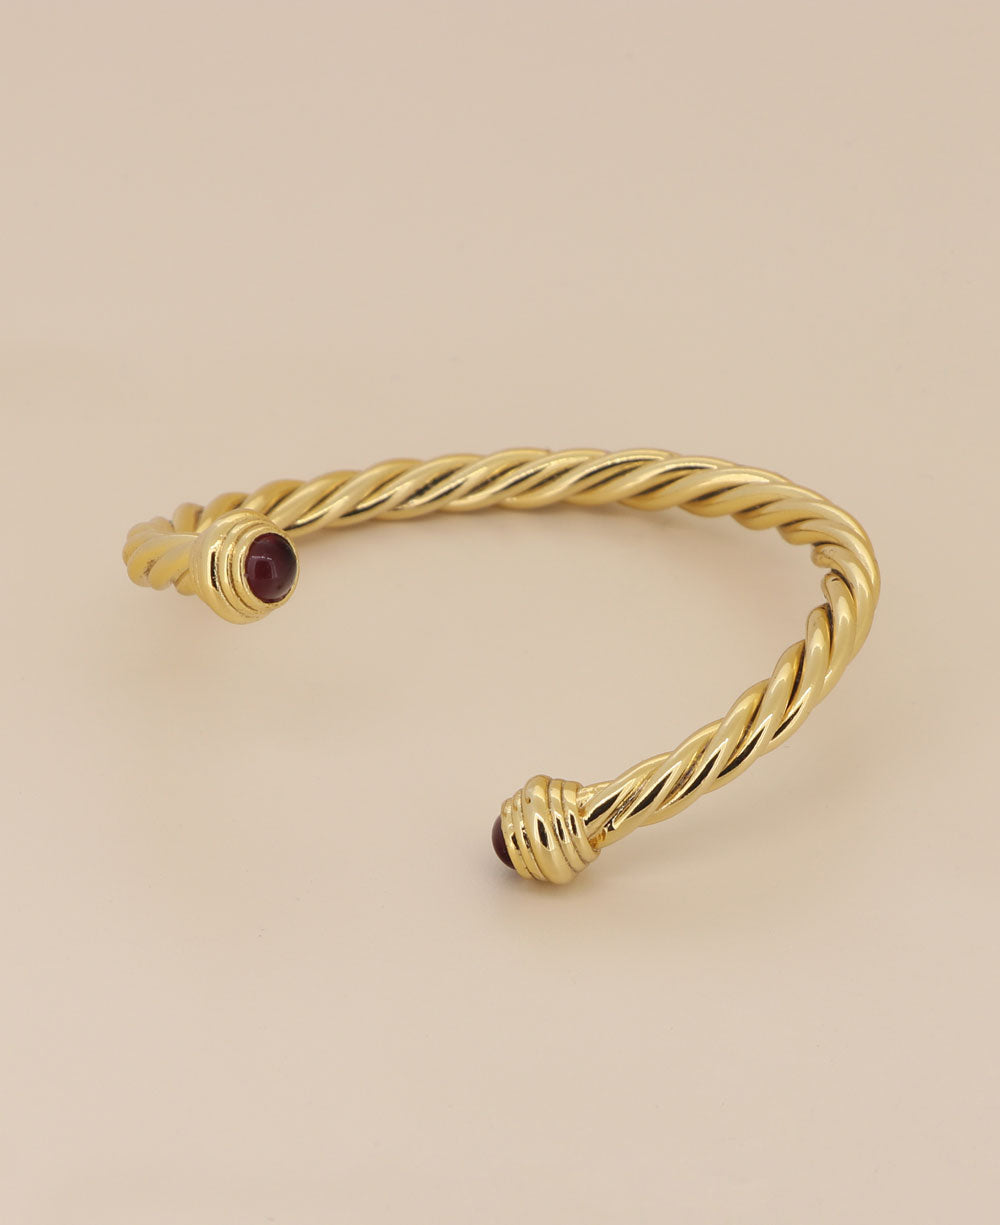 Close-up view of the intricate twisted rope design and dual stones on the gold-plated bracelet